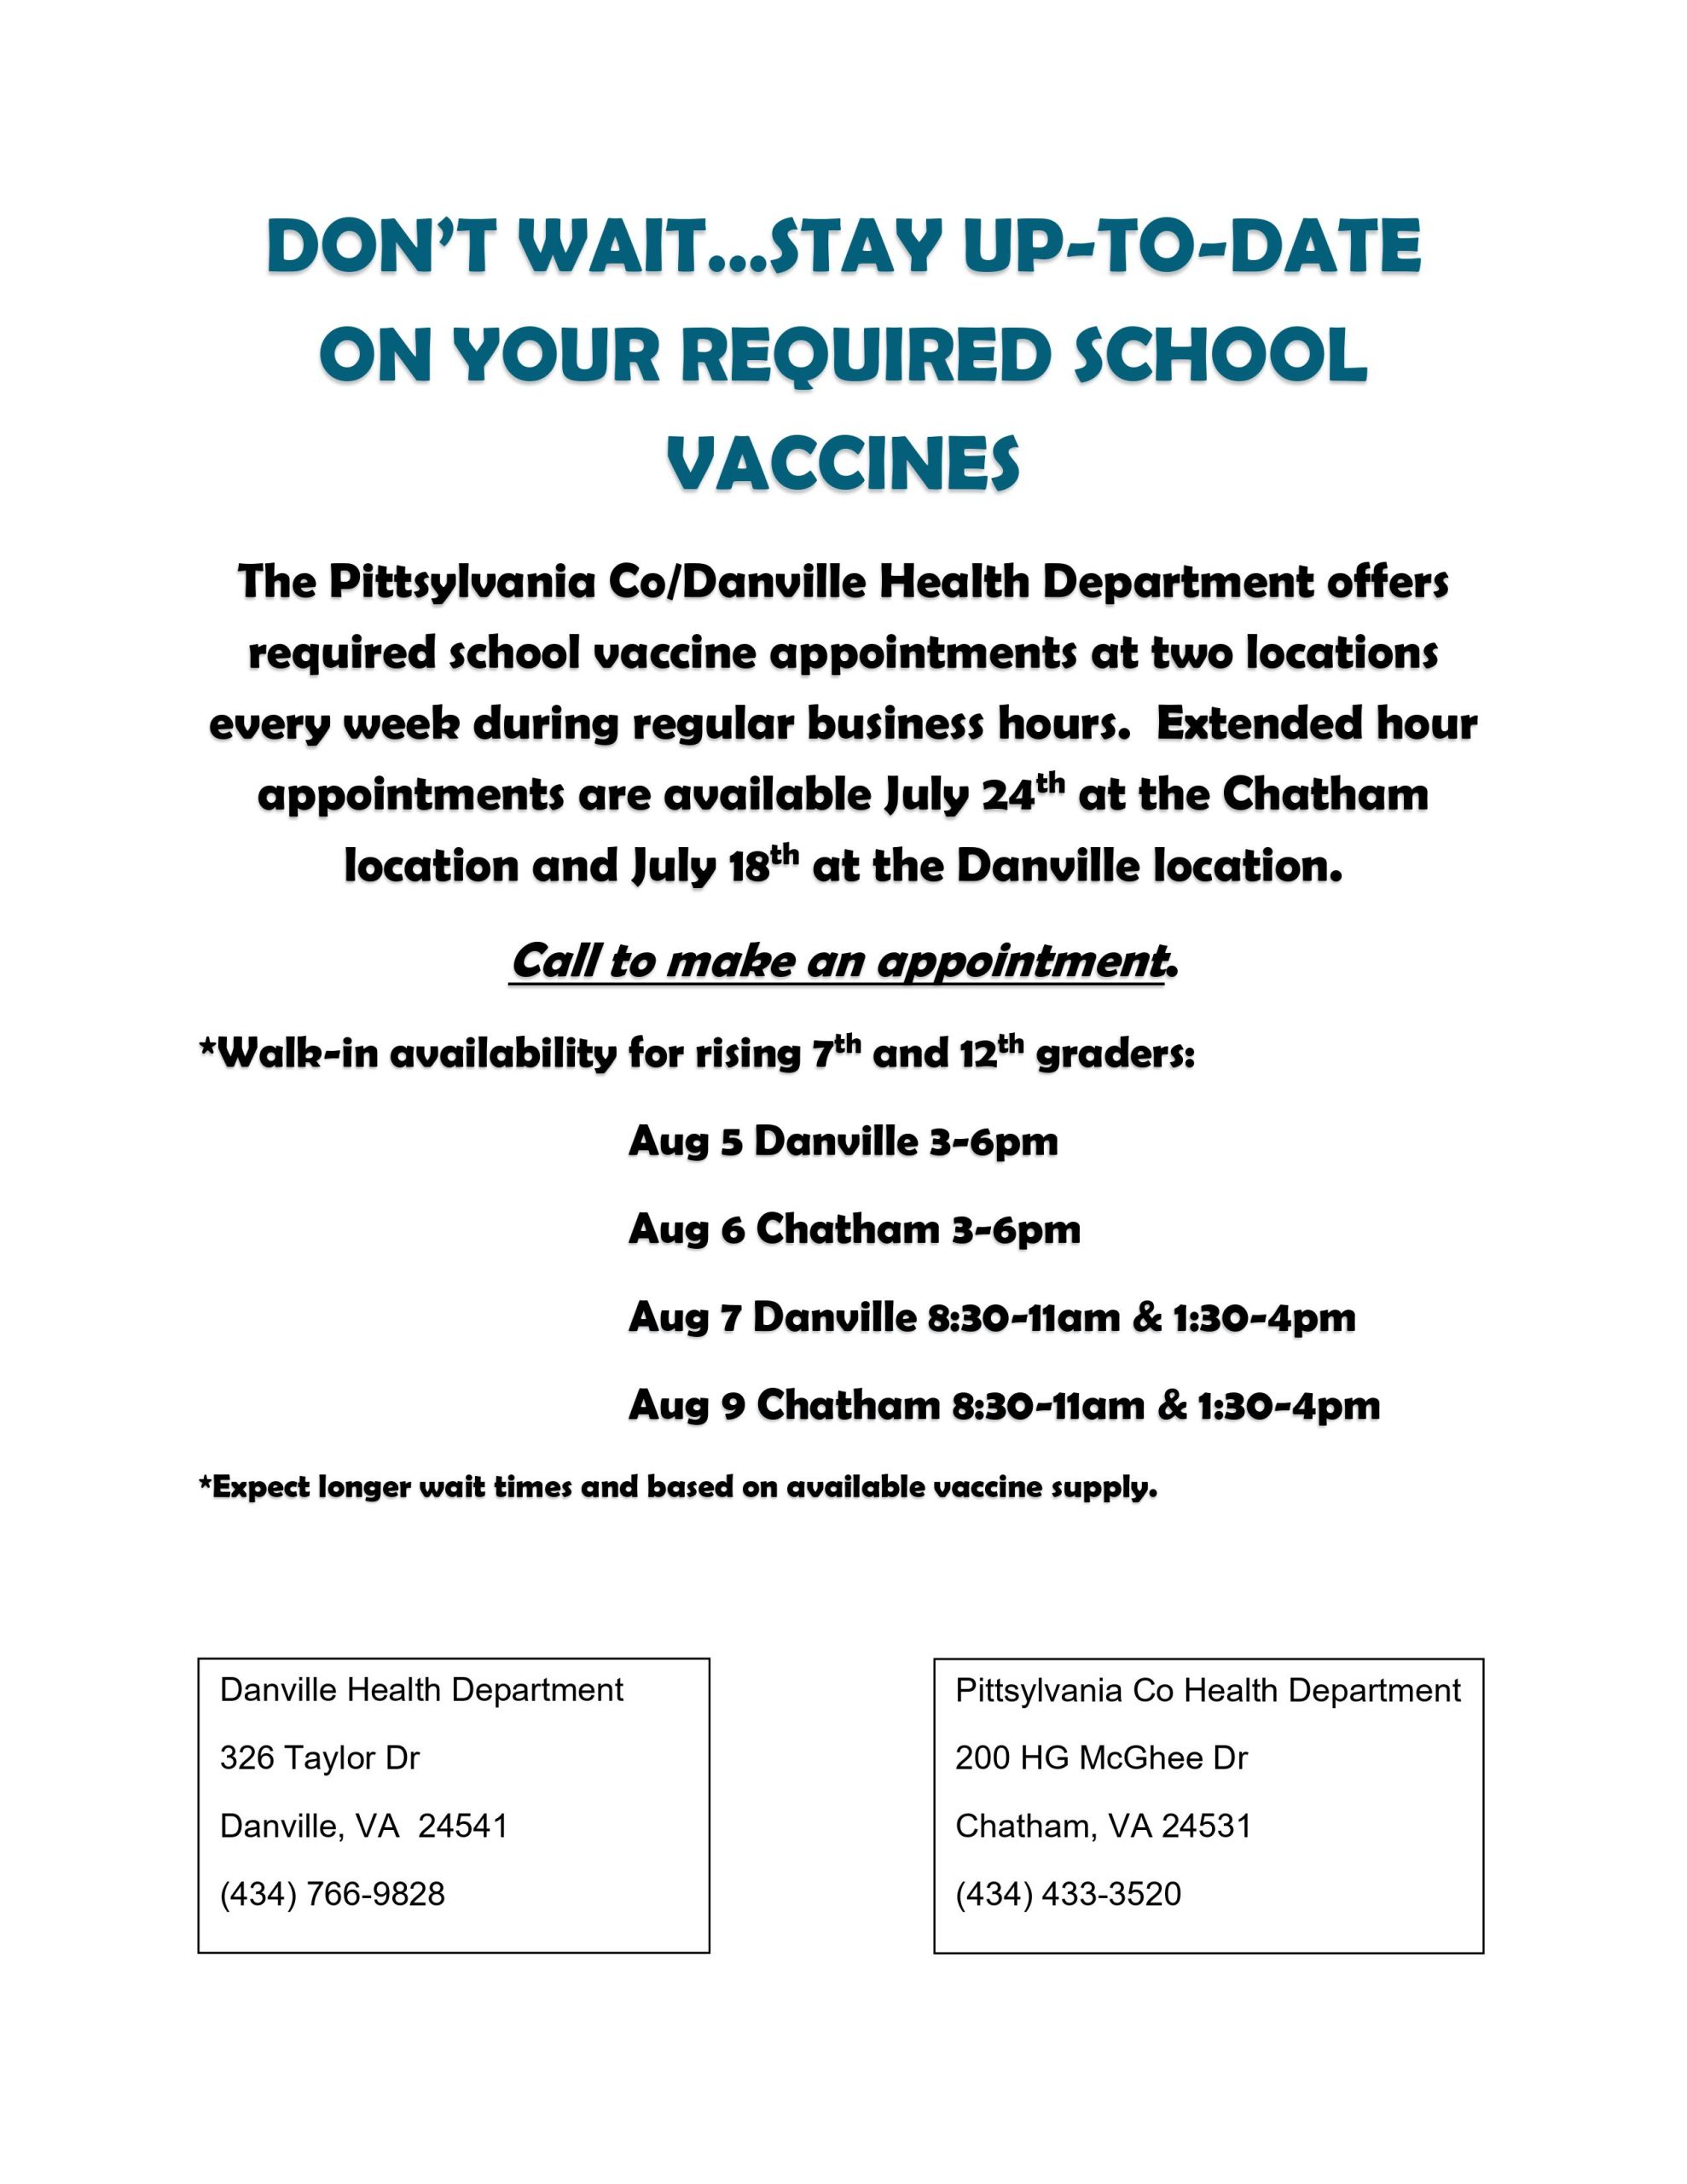 Flyer to remind individuals to stay up to date on required school vaccines with contact information for the two health departments.